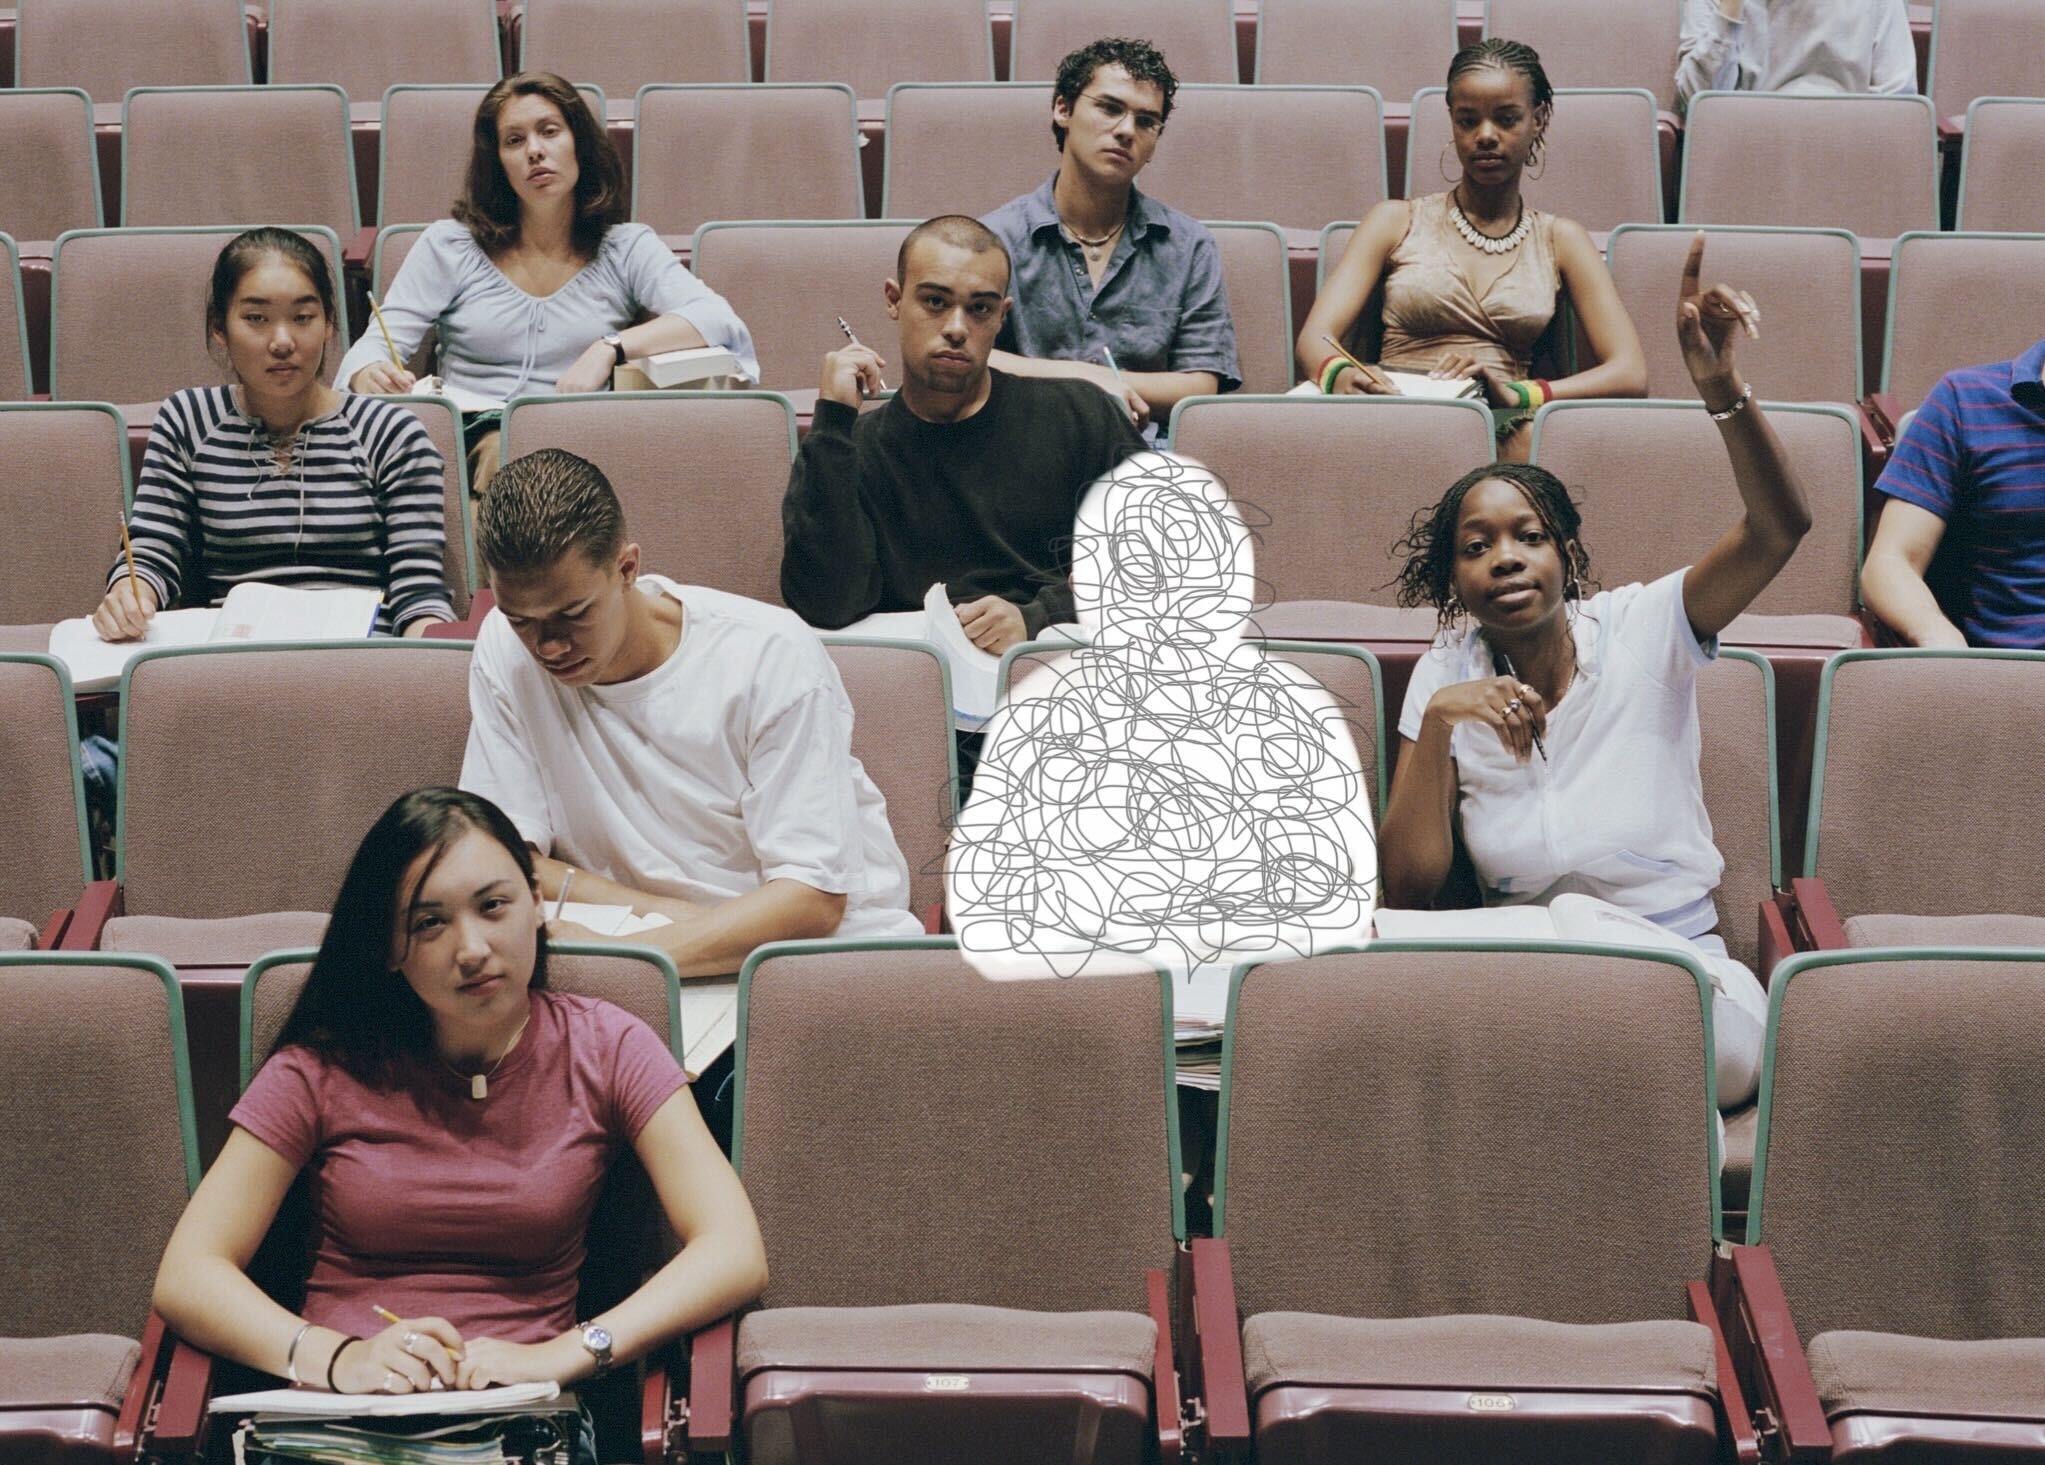 Students sit in a lecture hall; one figure in the center is obscured by tangled lines, representing confusion or anonymity